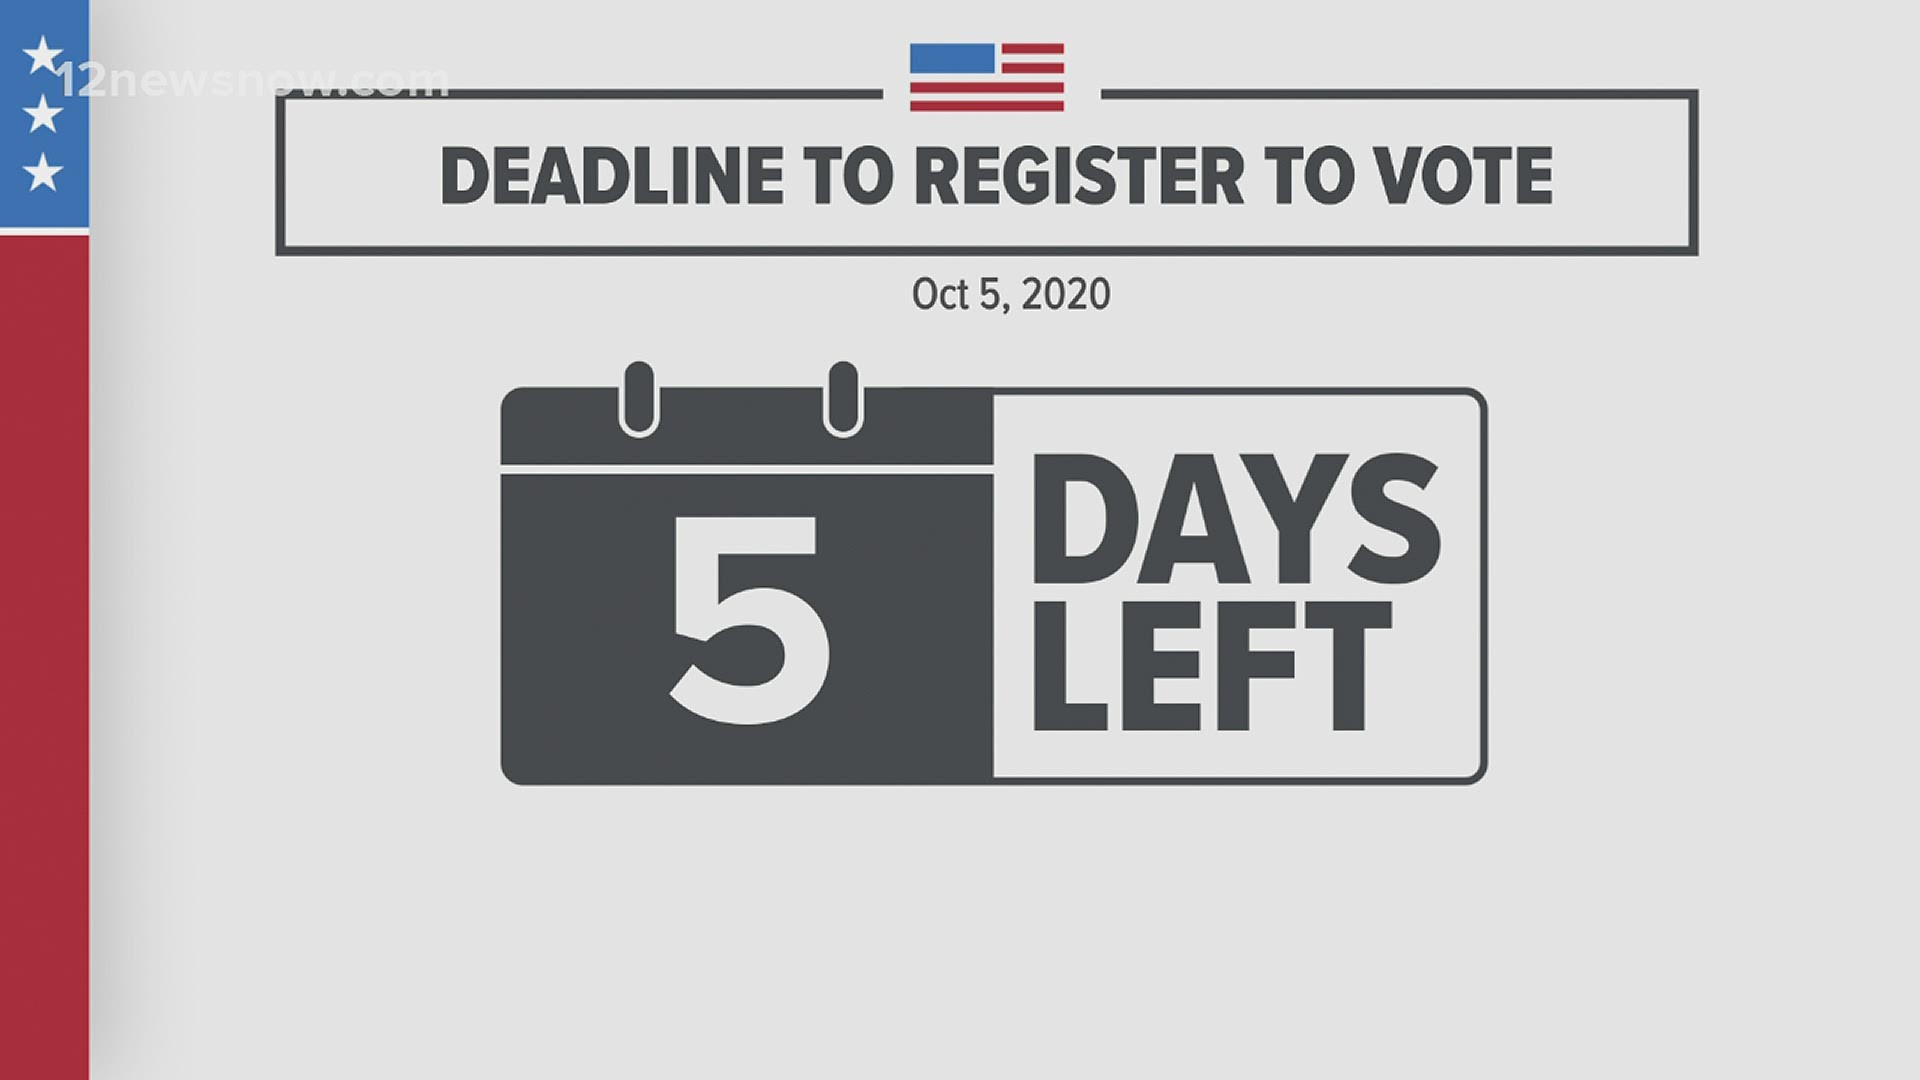 The last day to register to vote is October 5, 2020. For more information on voting, text "VOTE" to (409) 838- 1212.